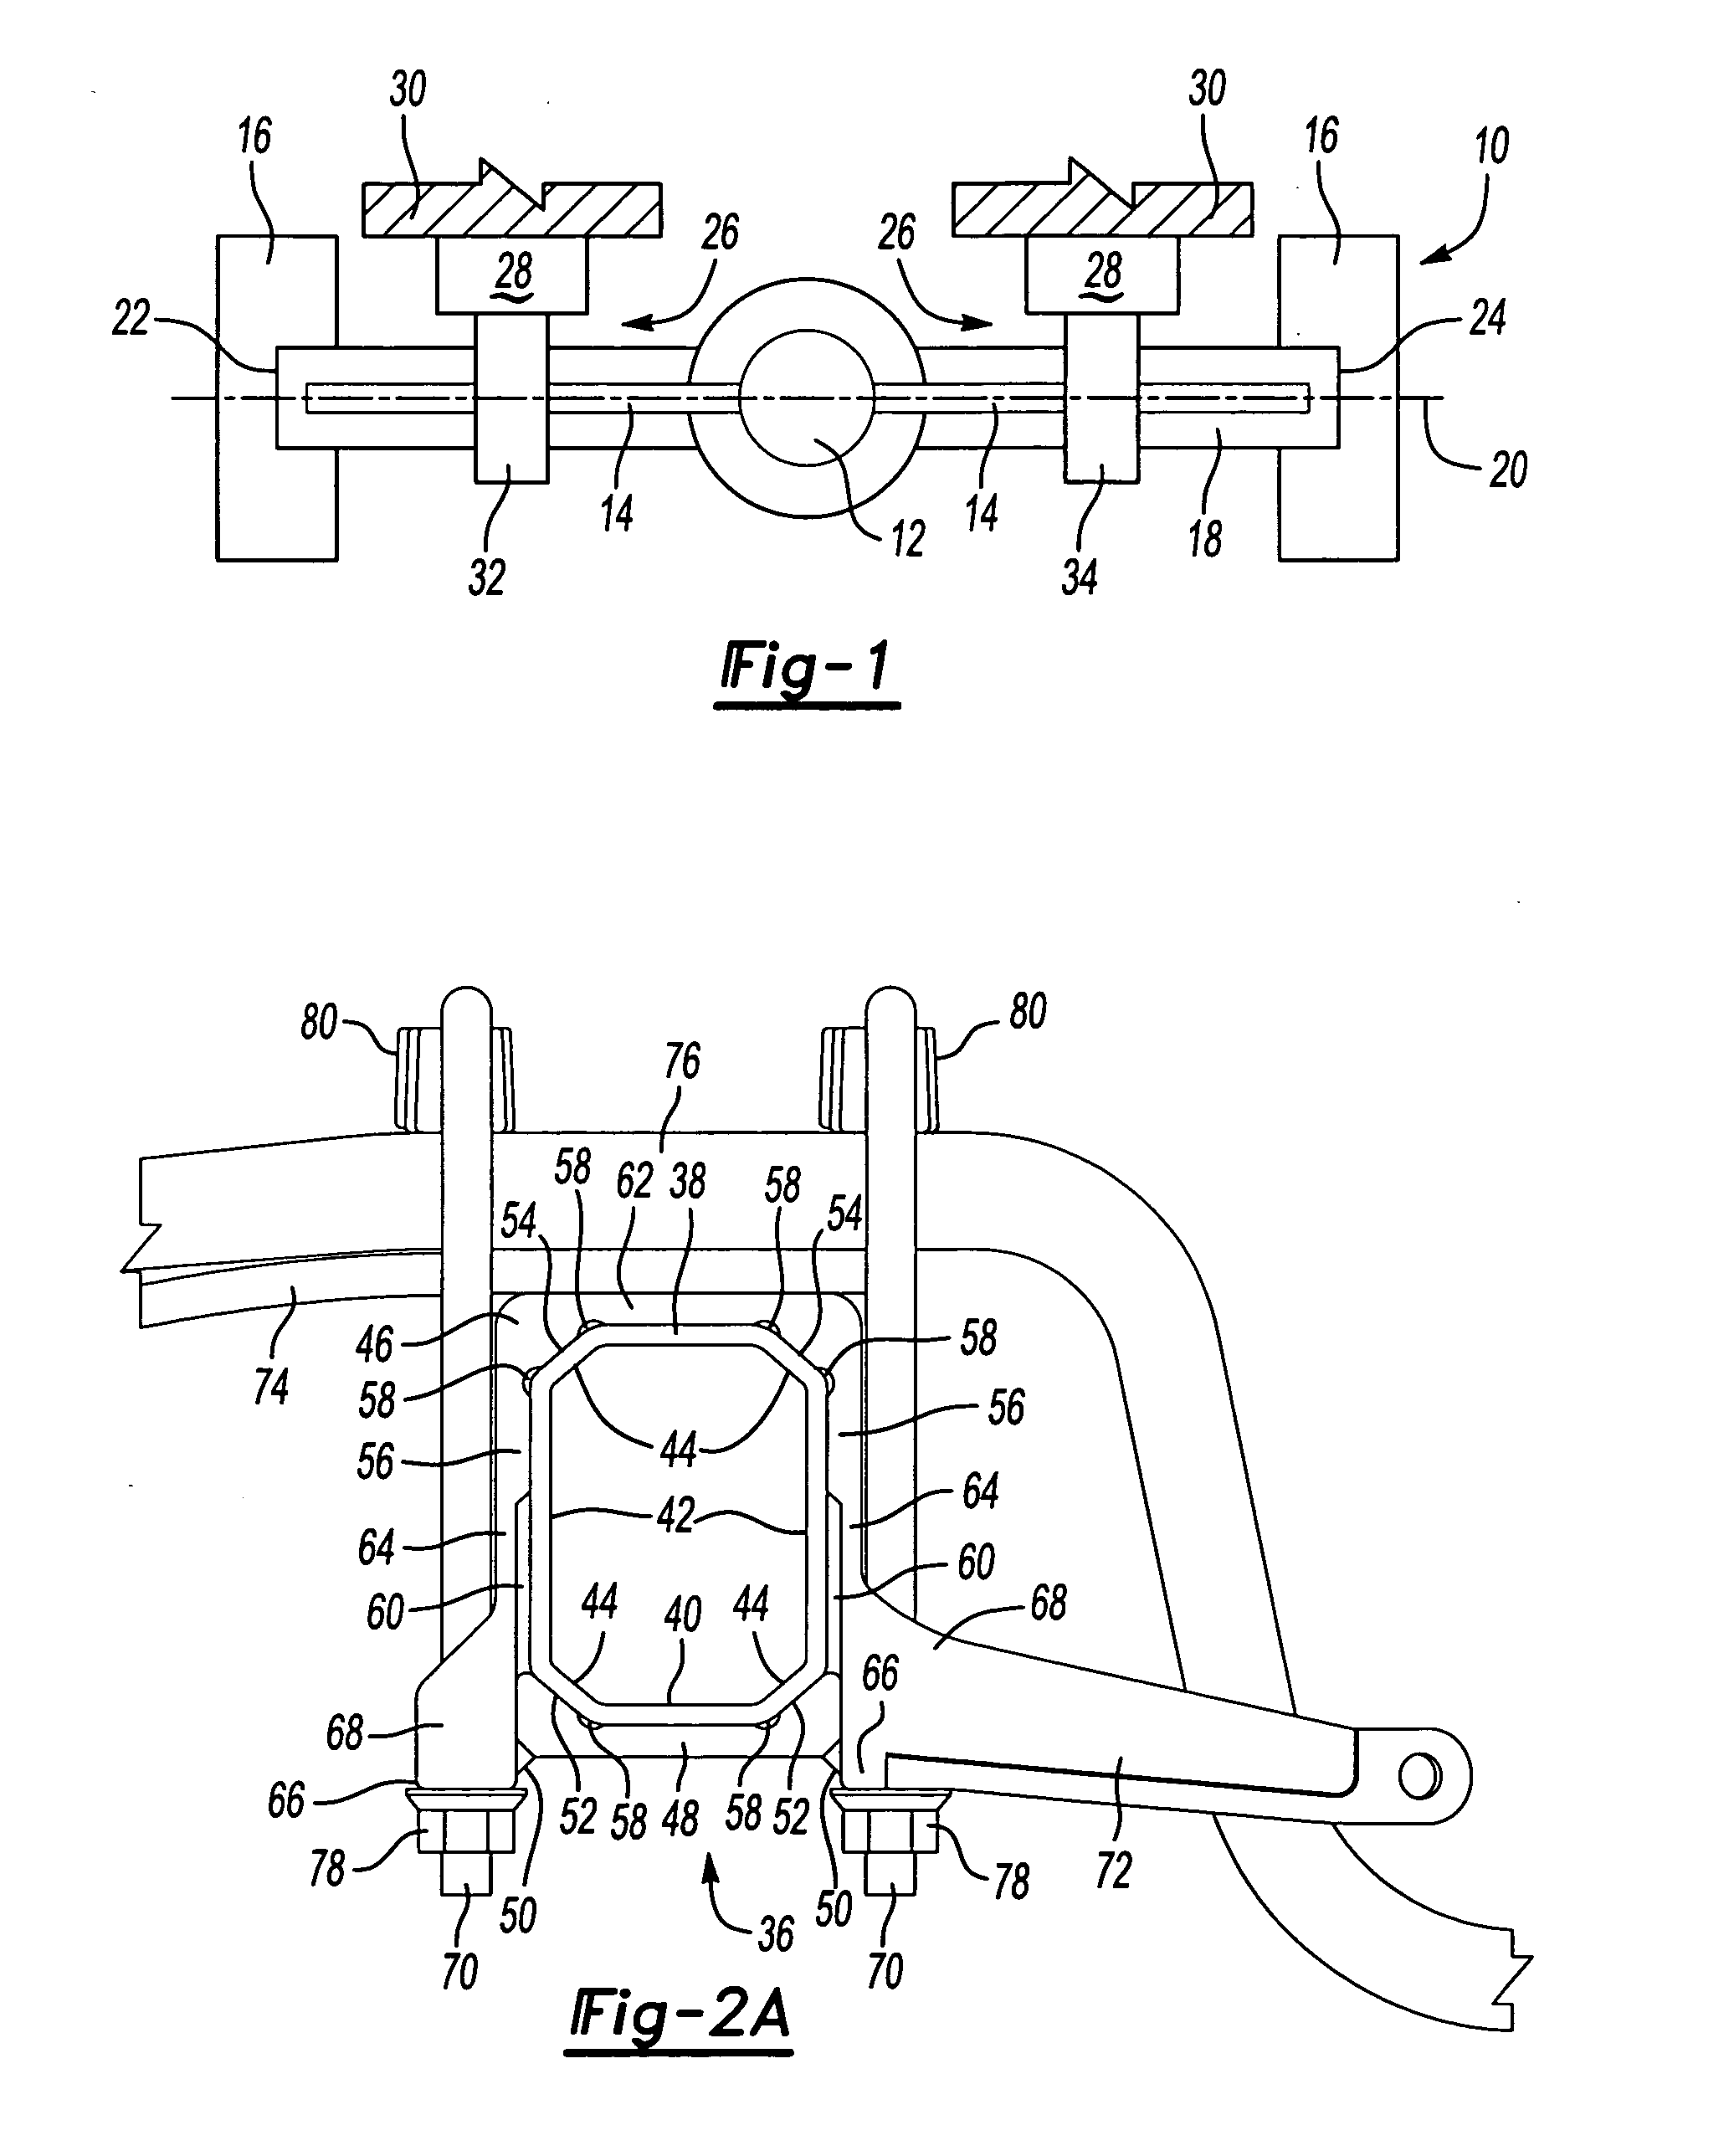 Preloaded suspension bracket assembly for axle housing